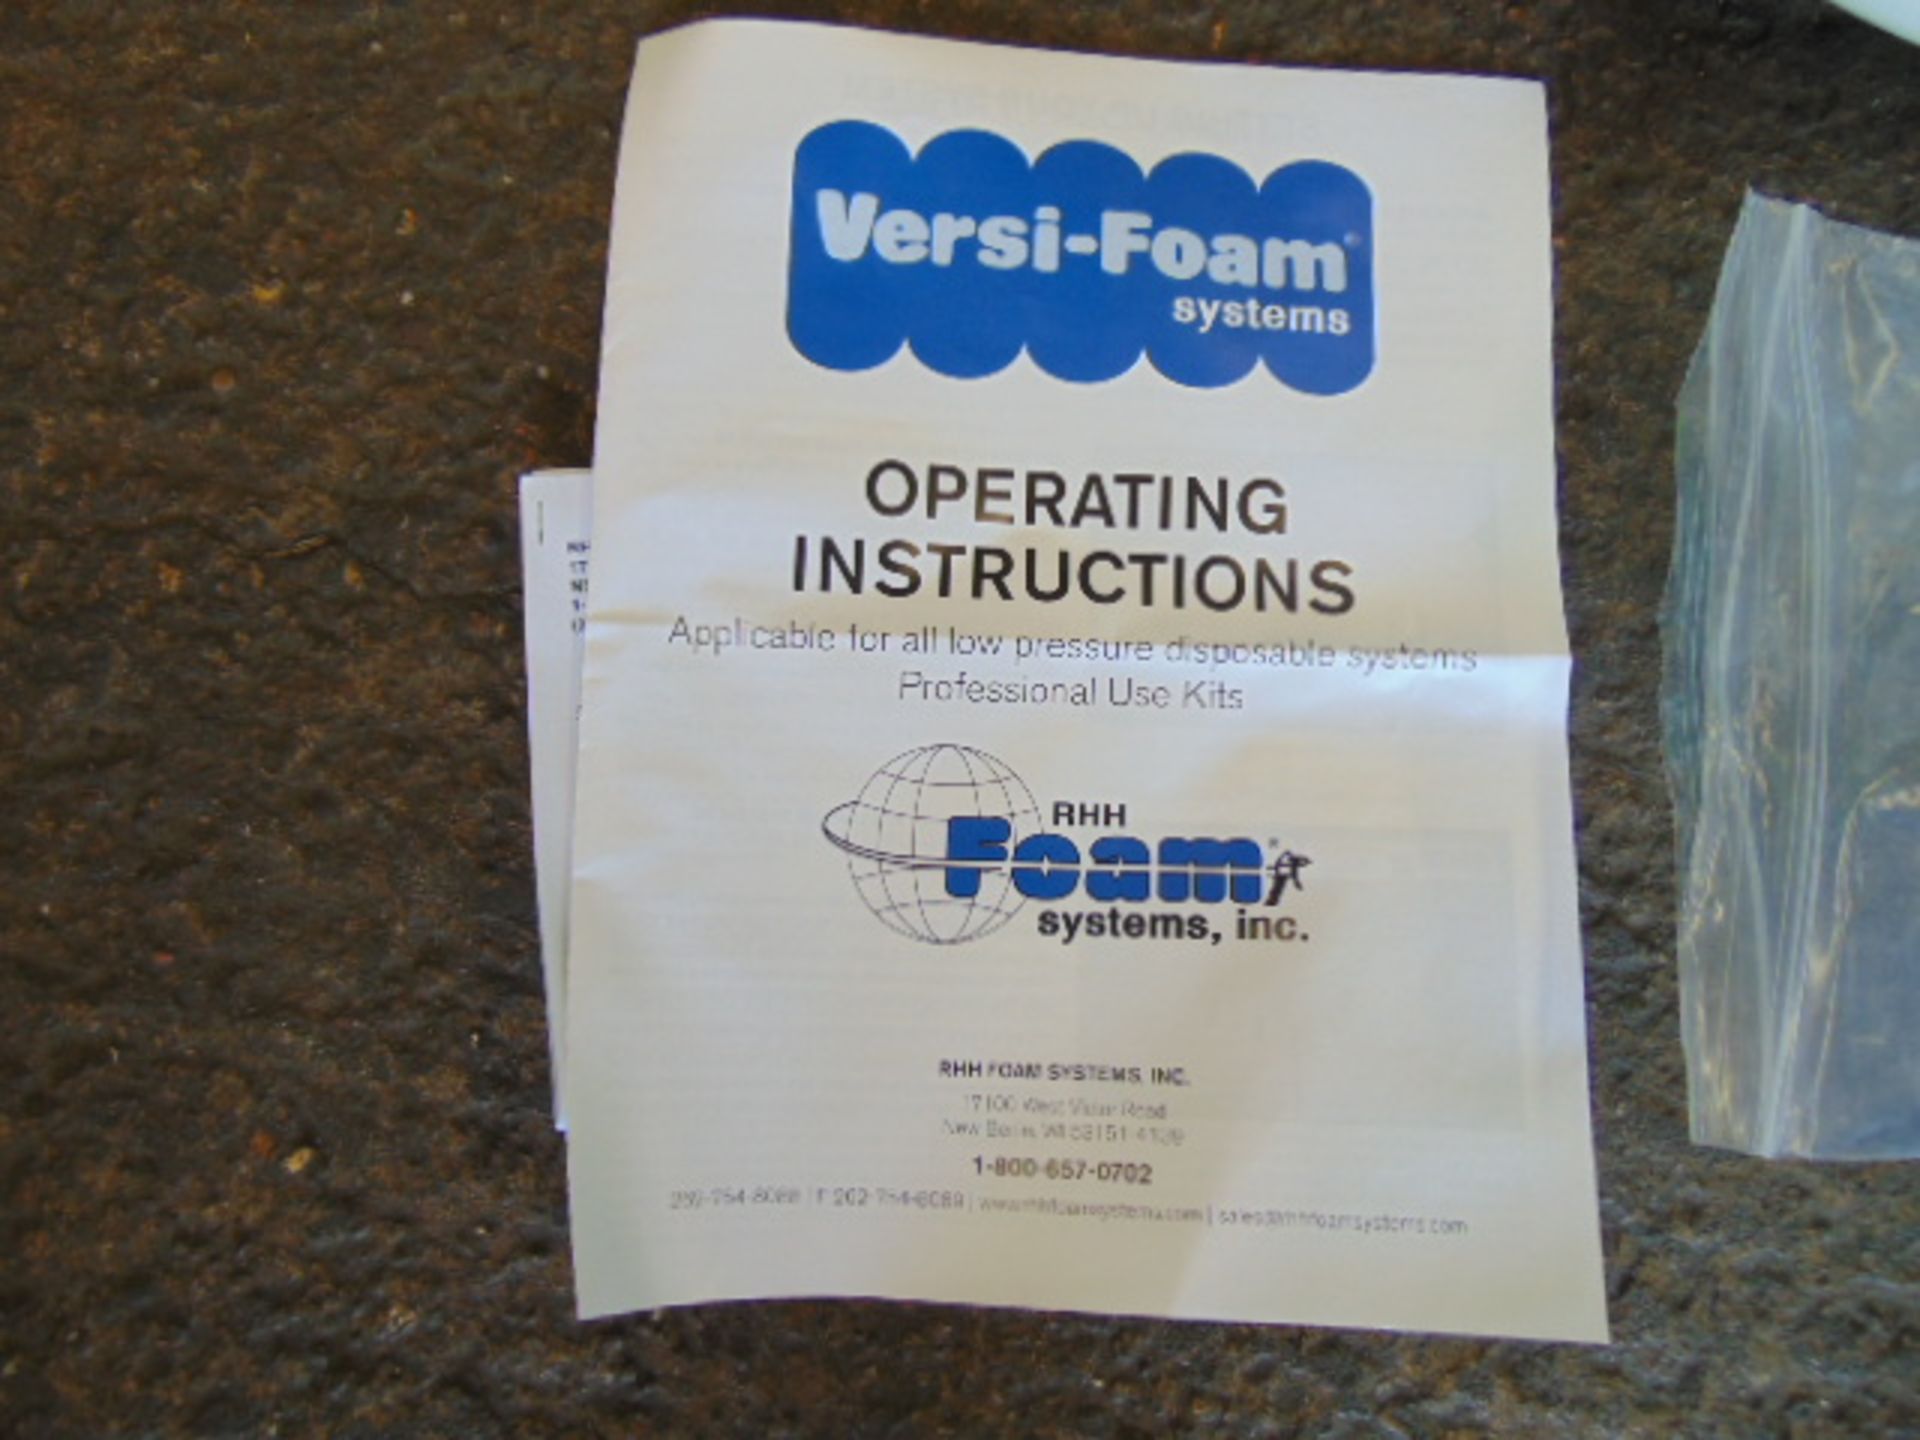 4 Packs (A & B Component) of Versi Foam System 50 Insulating Foam for Walls, Roof, Building etc - Image 5 of 11